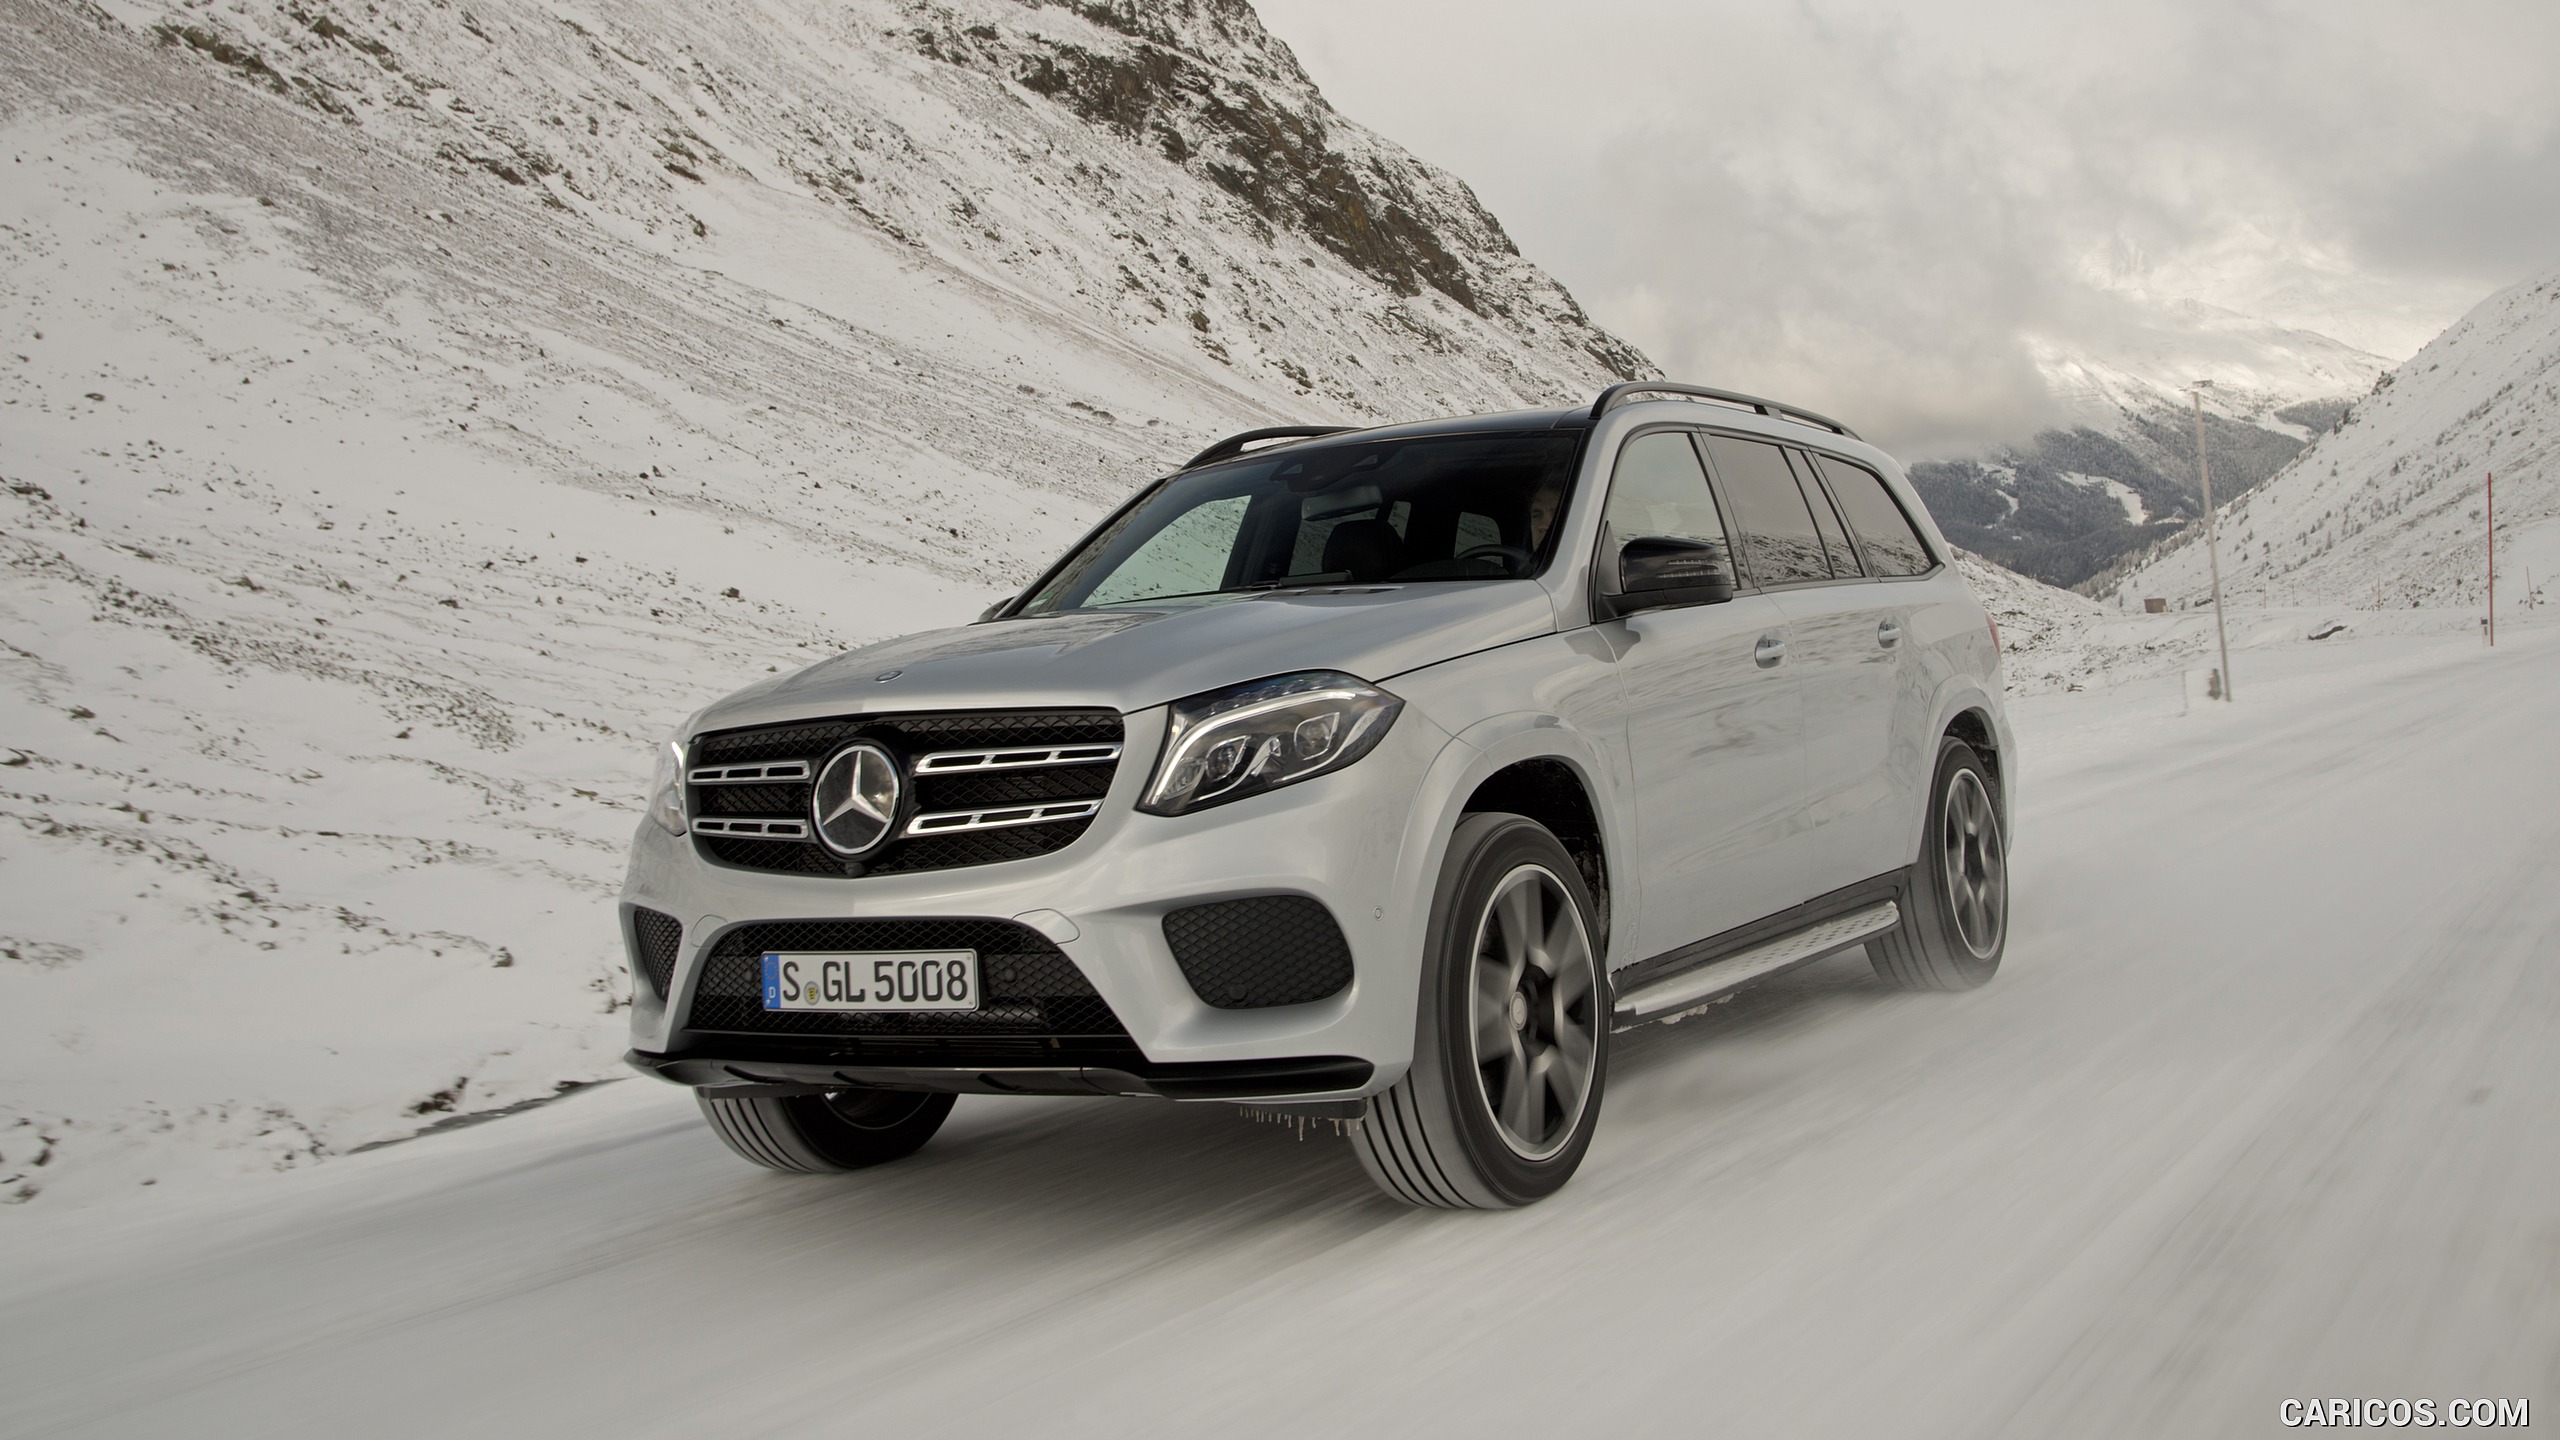 2017 Mercedes-Benz GLS 500 4MATIC AMG Line in Snow - Front, #125 of 255